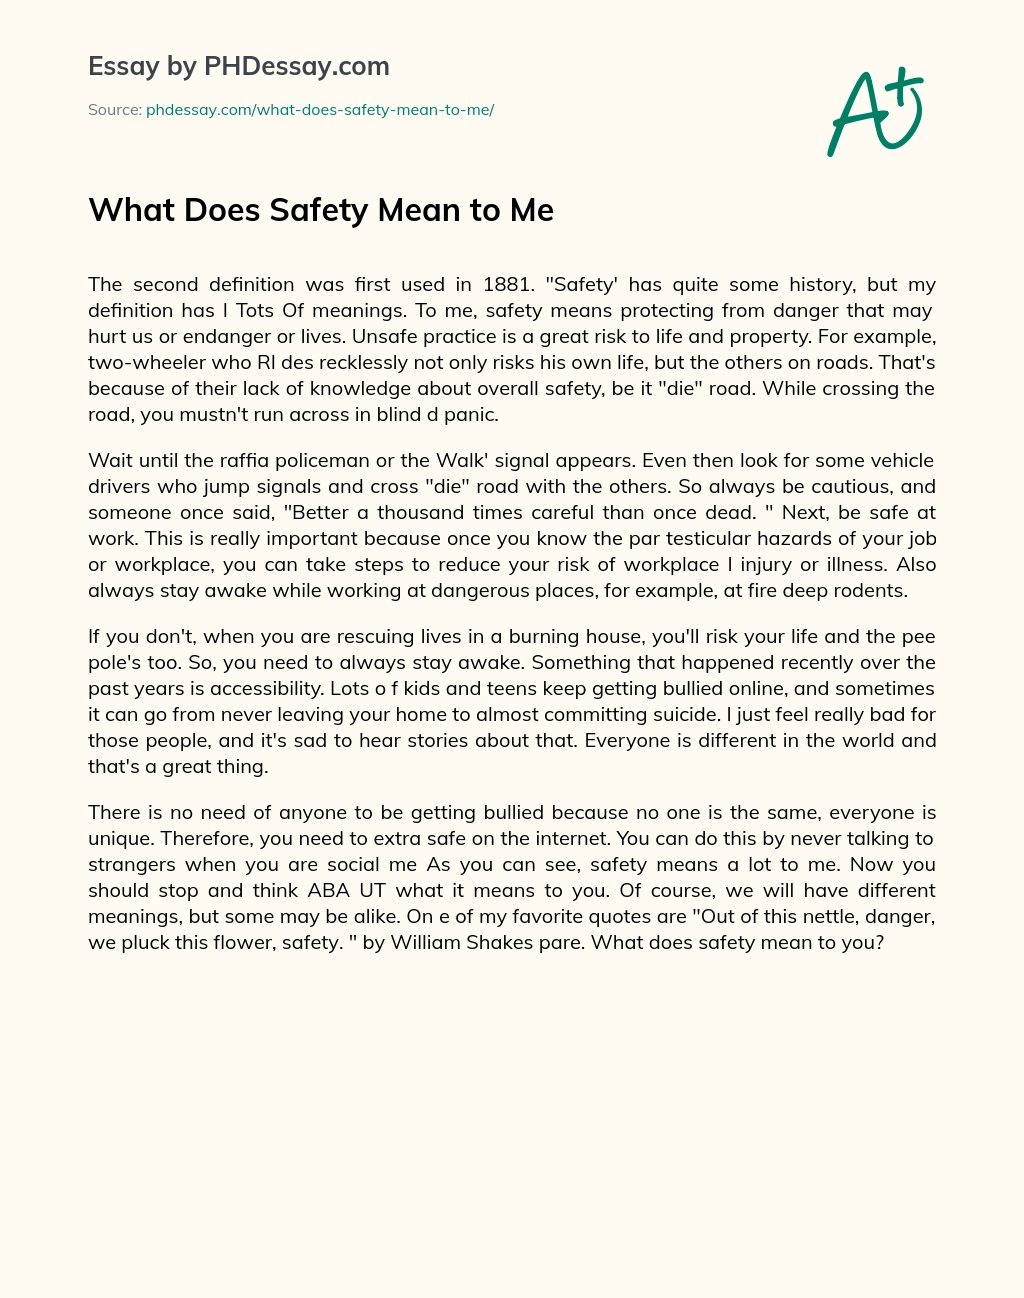 What Does Safety Mean to Me essay